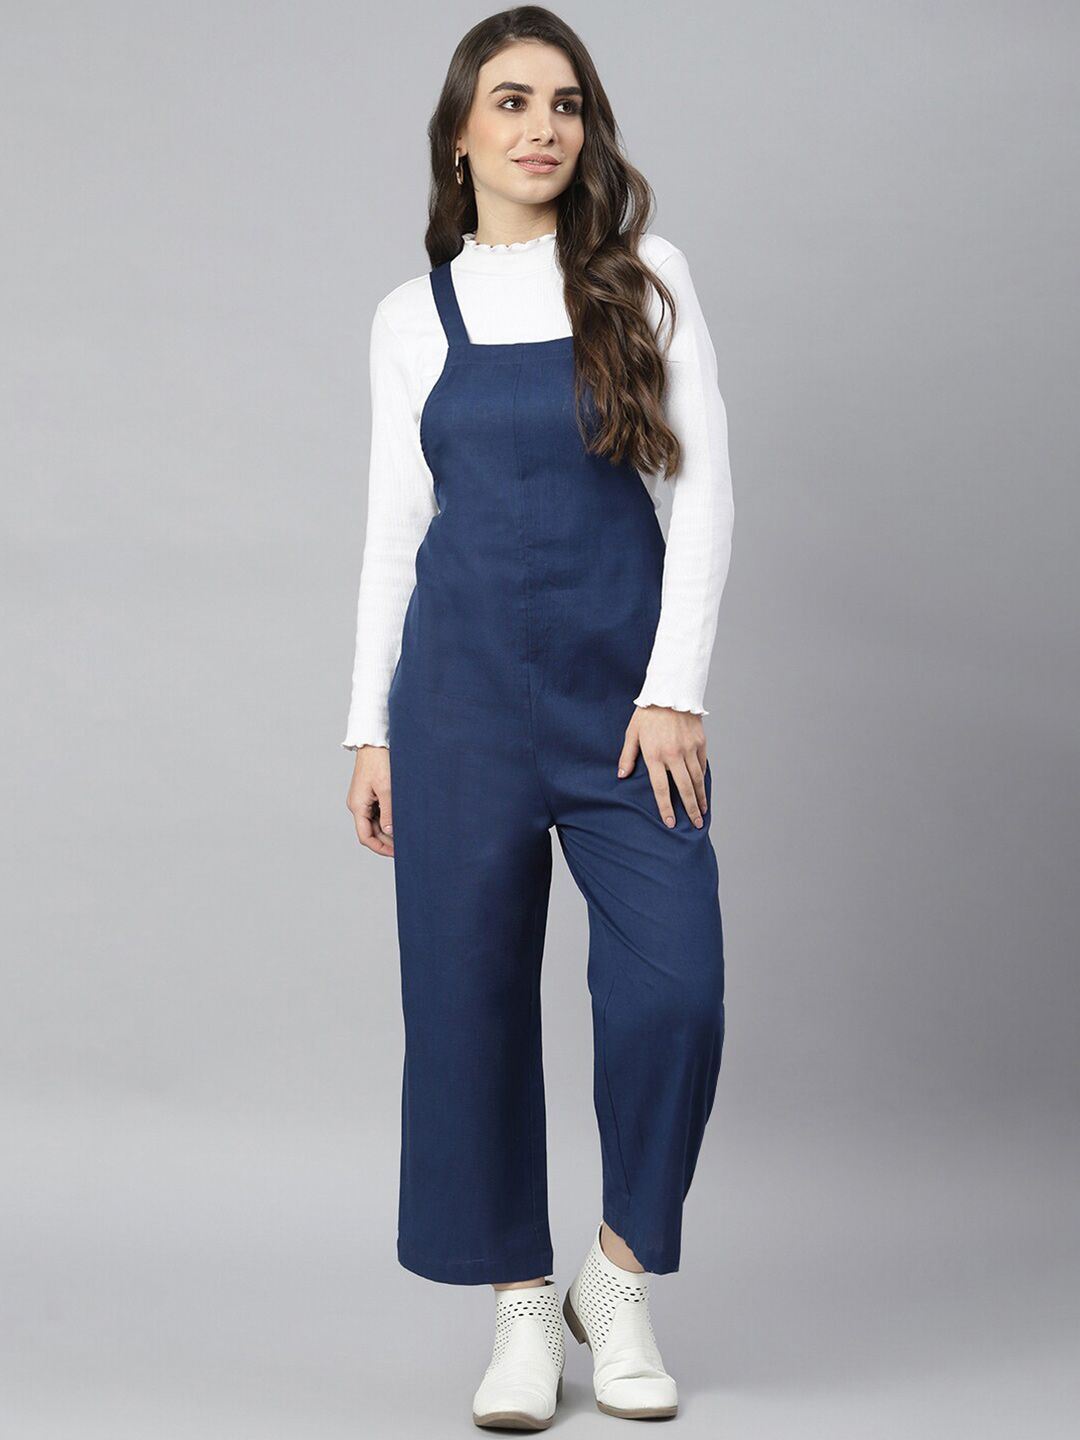 DEEBACO Navy Blue Cotton Basic One Piece Jumpsuit Price in India